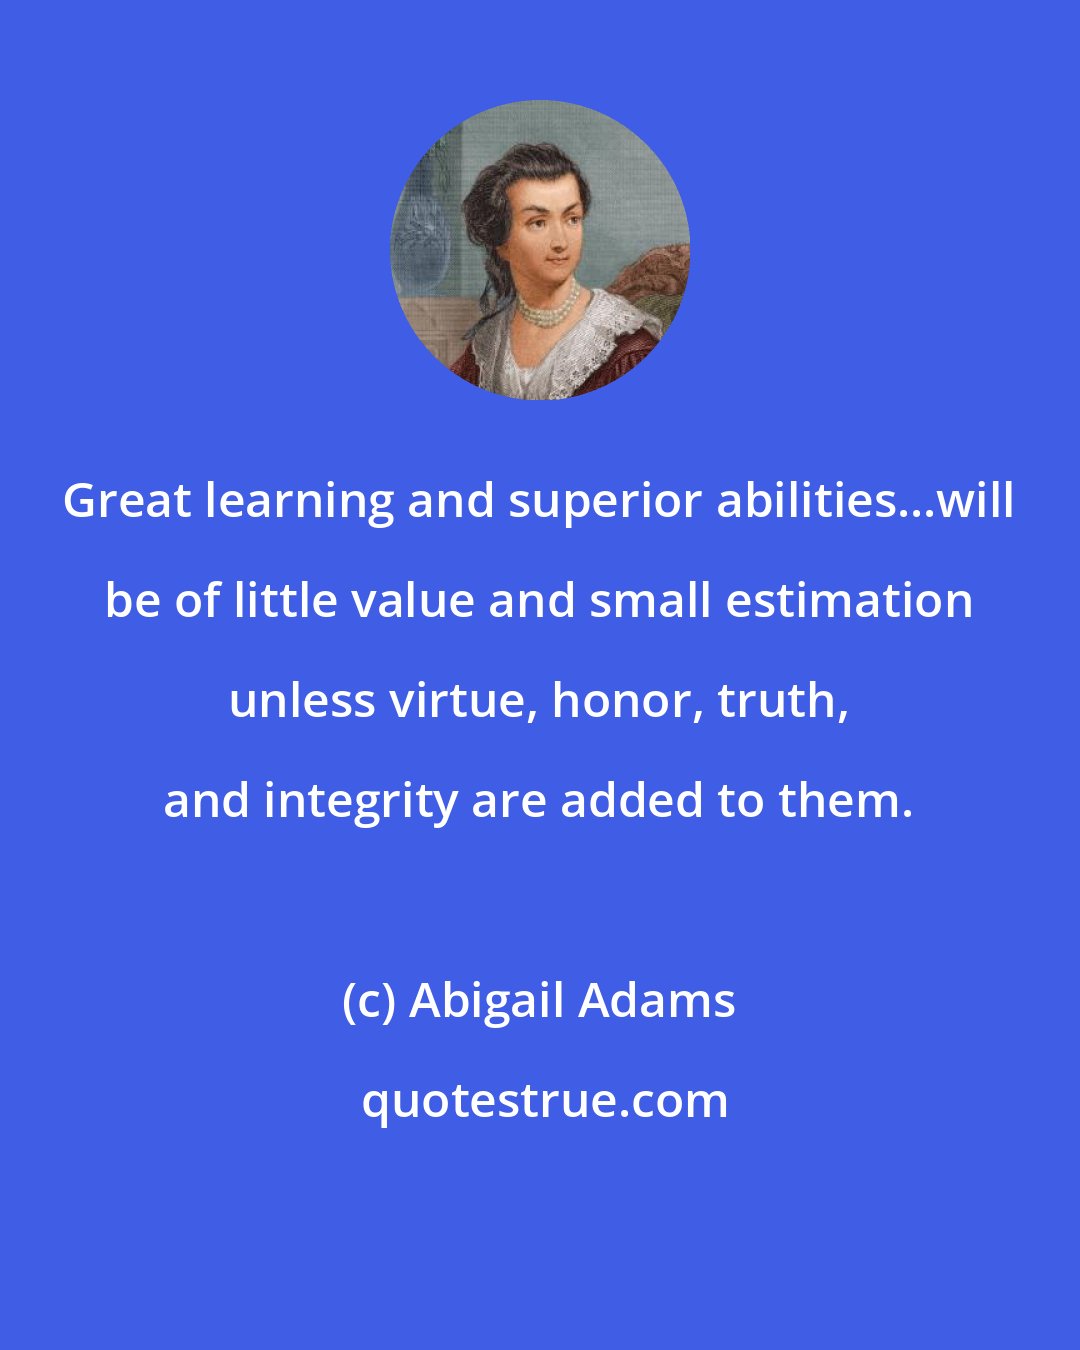 Abigail Adams: Great learning and superior abilities...will be of little value and small estimation unless virtue, honor, truth, and integrity are added to them.